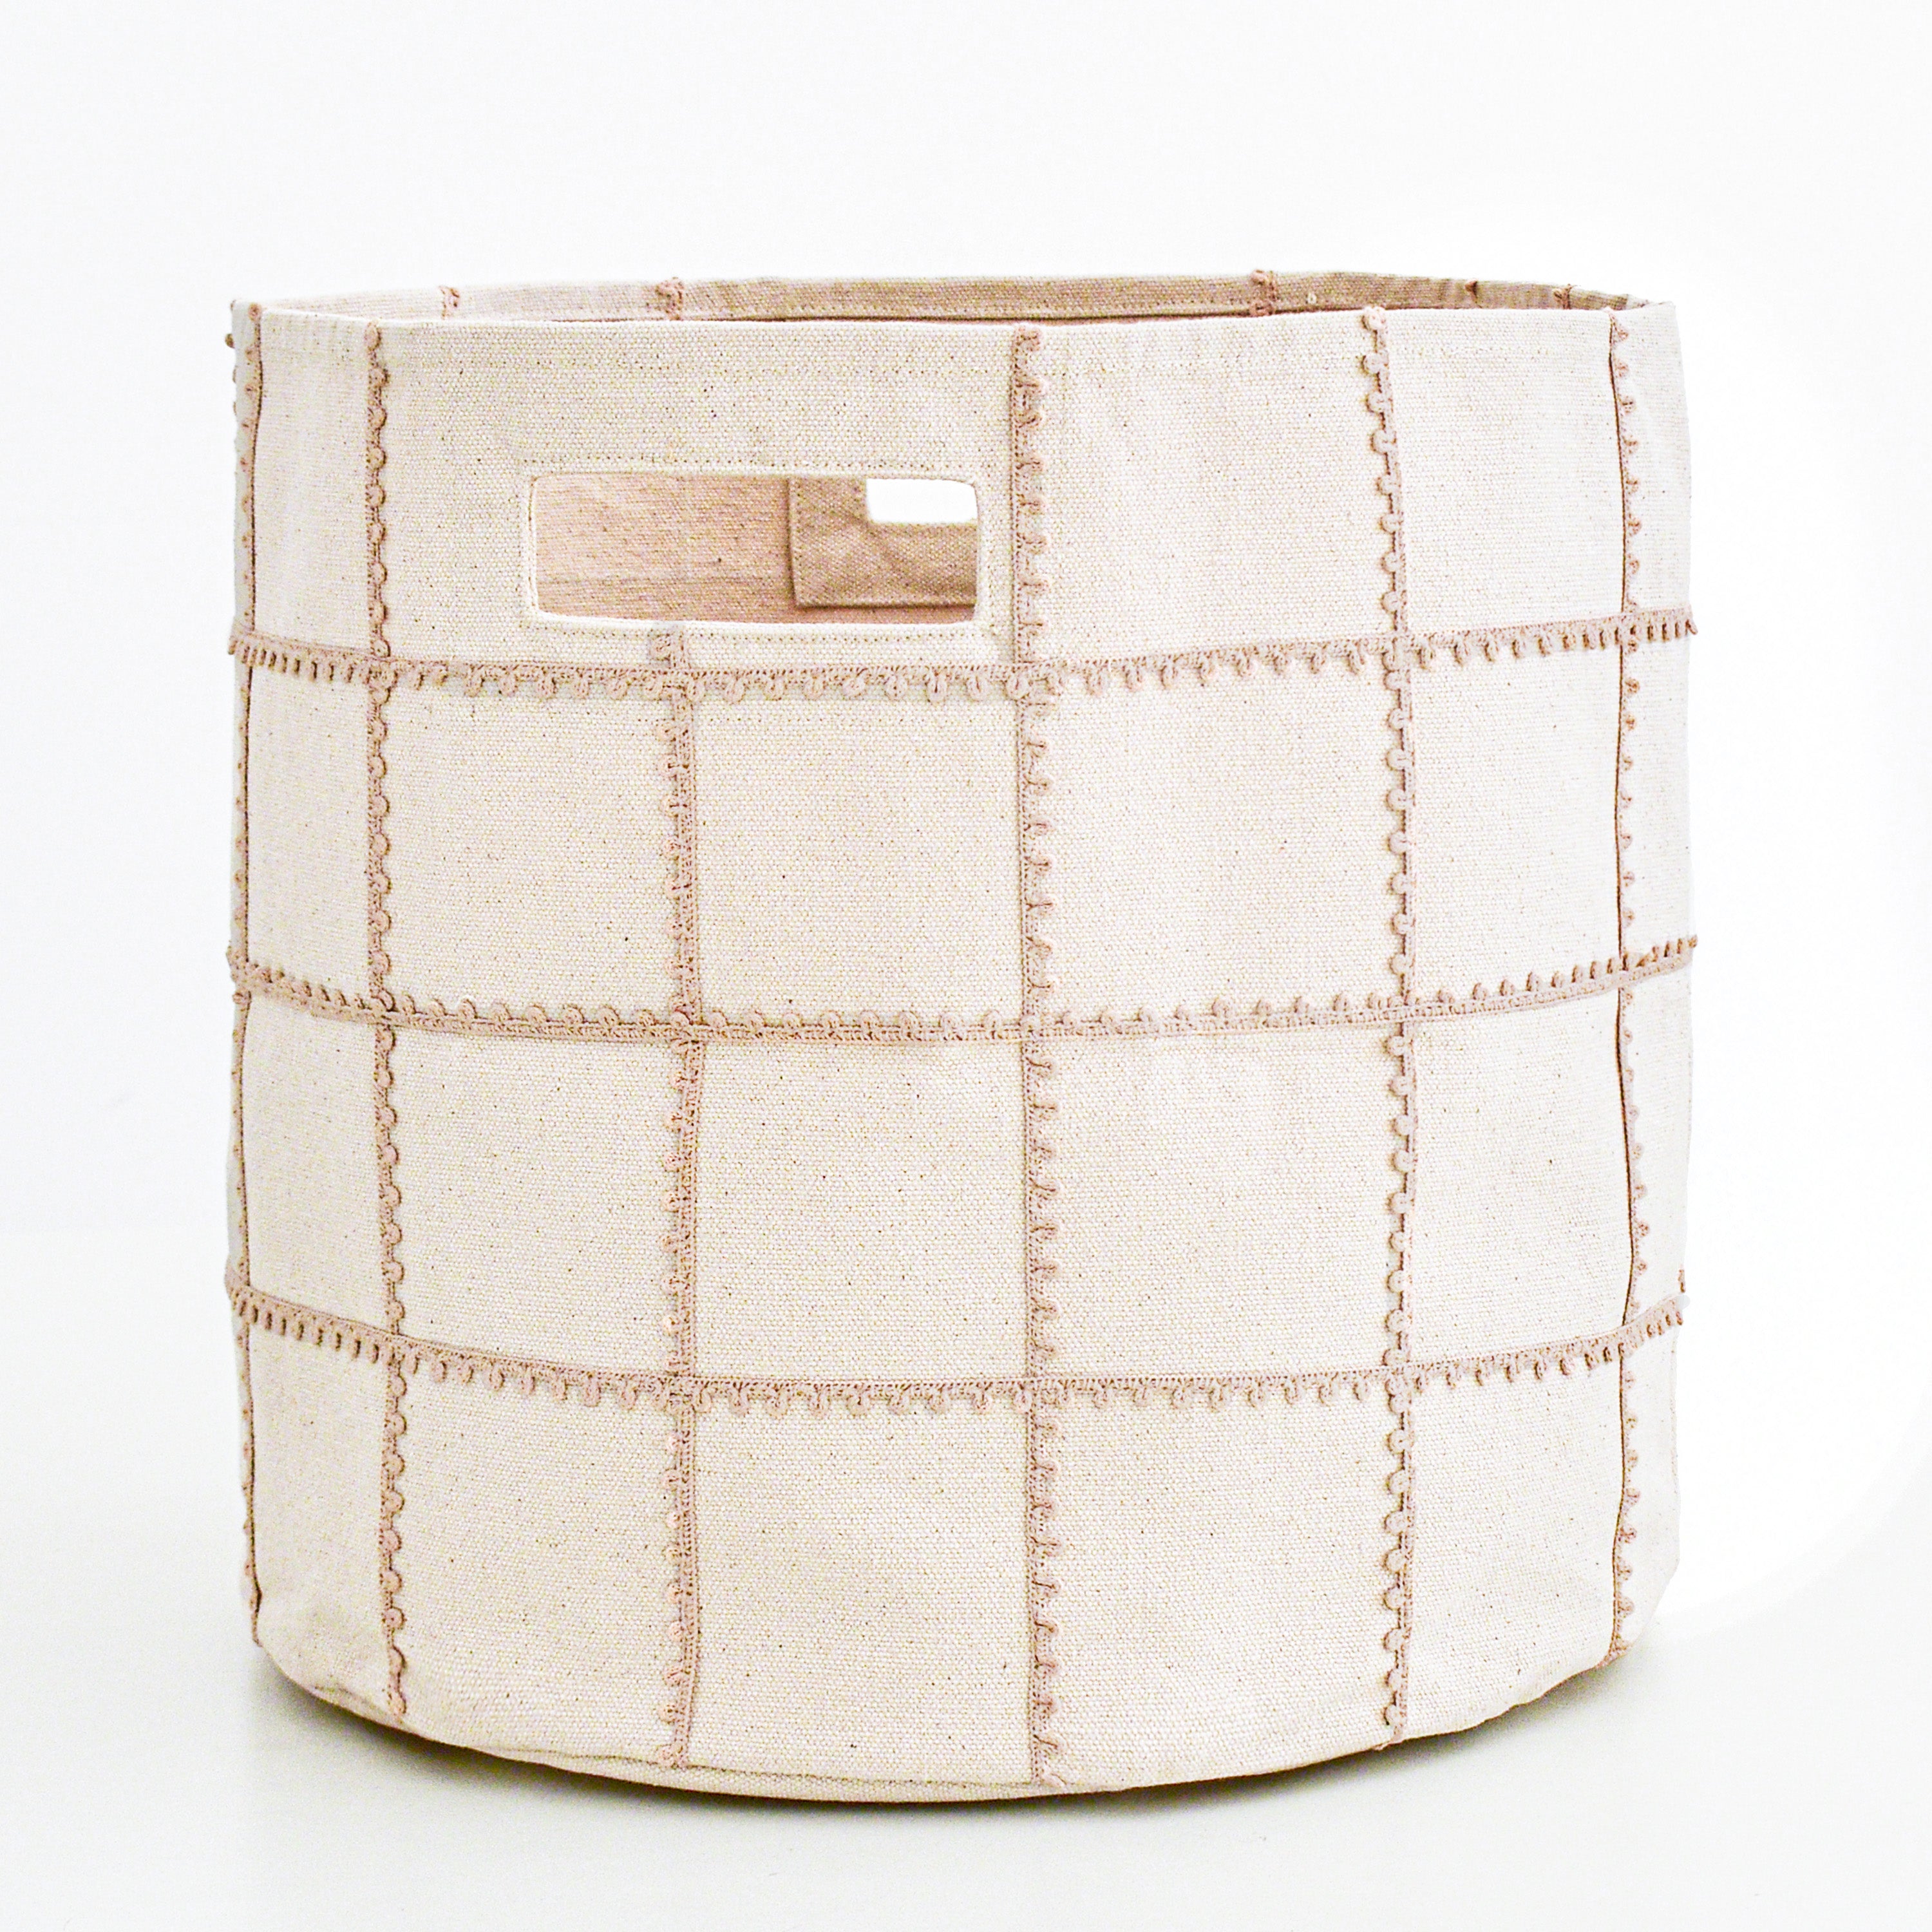 A cylindrical fabric storage bin with visible stitching, creating a grid pattern, stands against a plain white background. The Makemake Organics Storage Basket Mesh Lace - Taupe features a small fabric handle on its side.